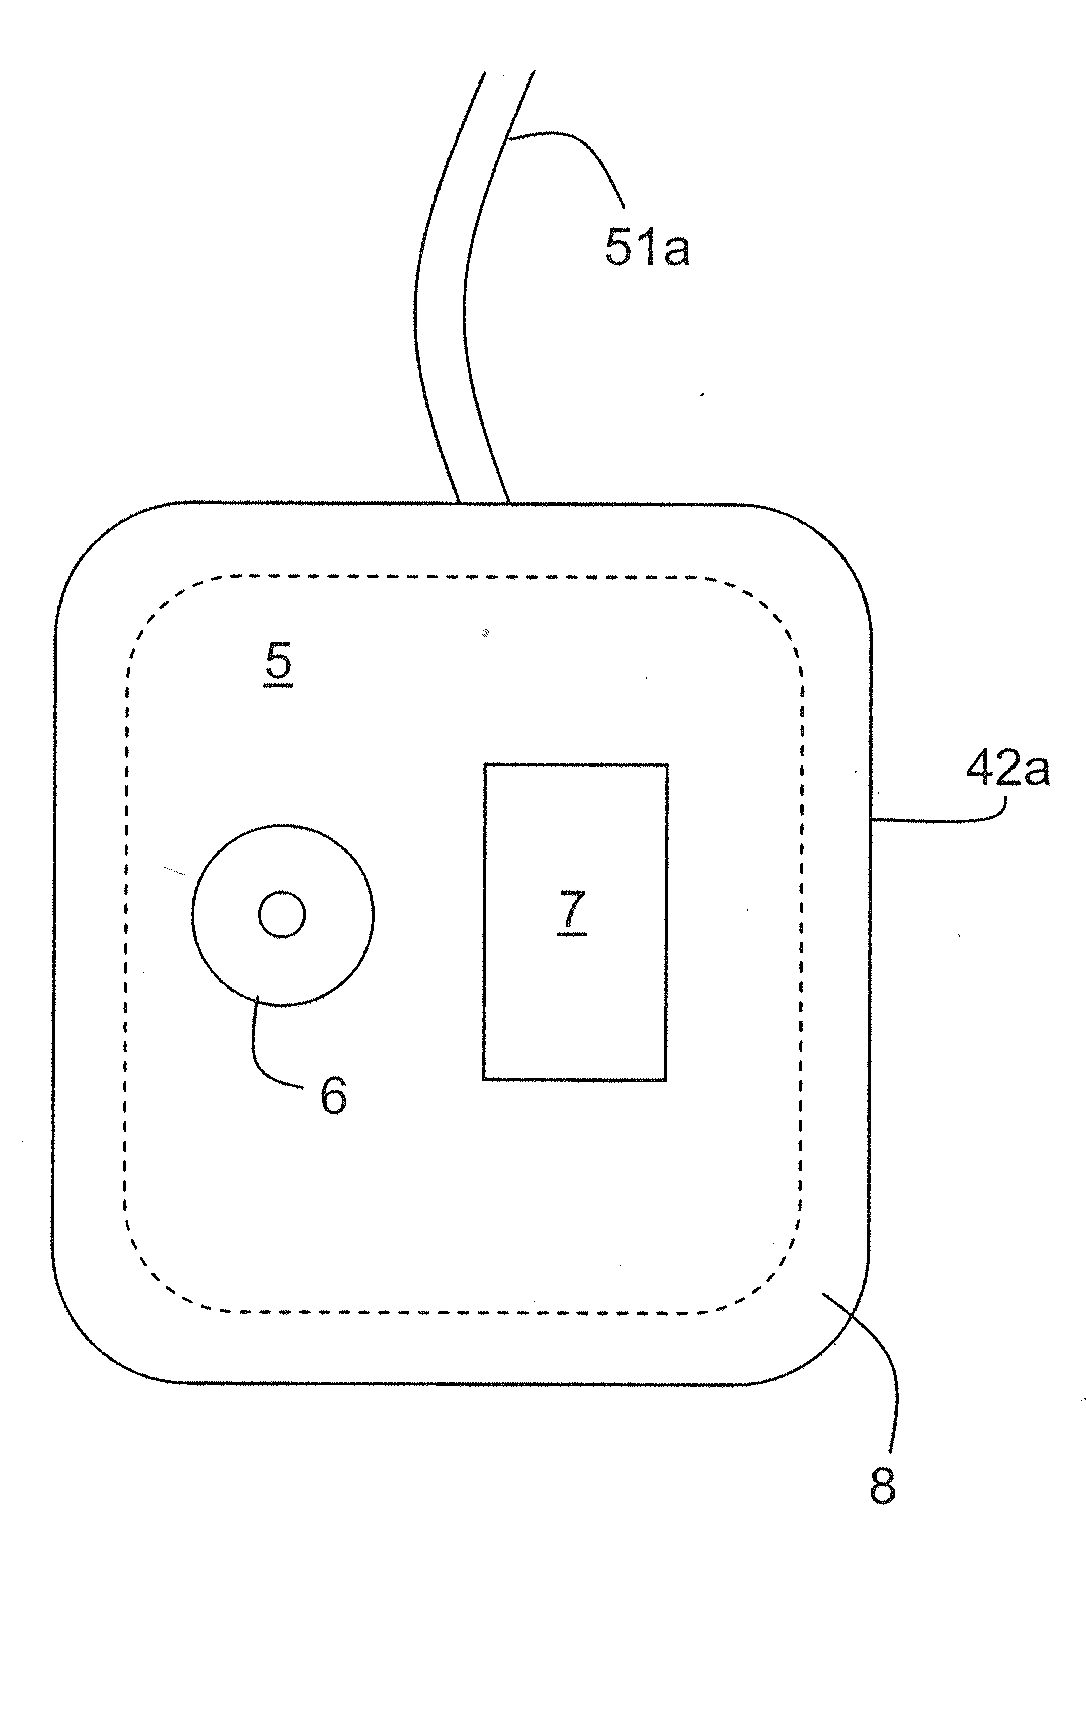 Device for determining respiratory rate and other vital signs